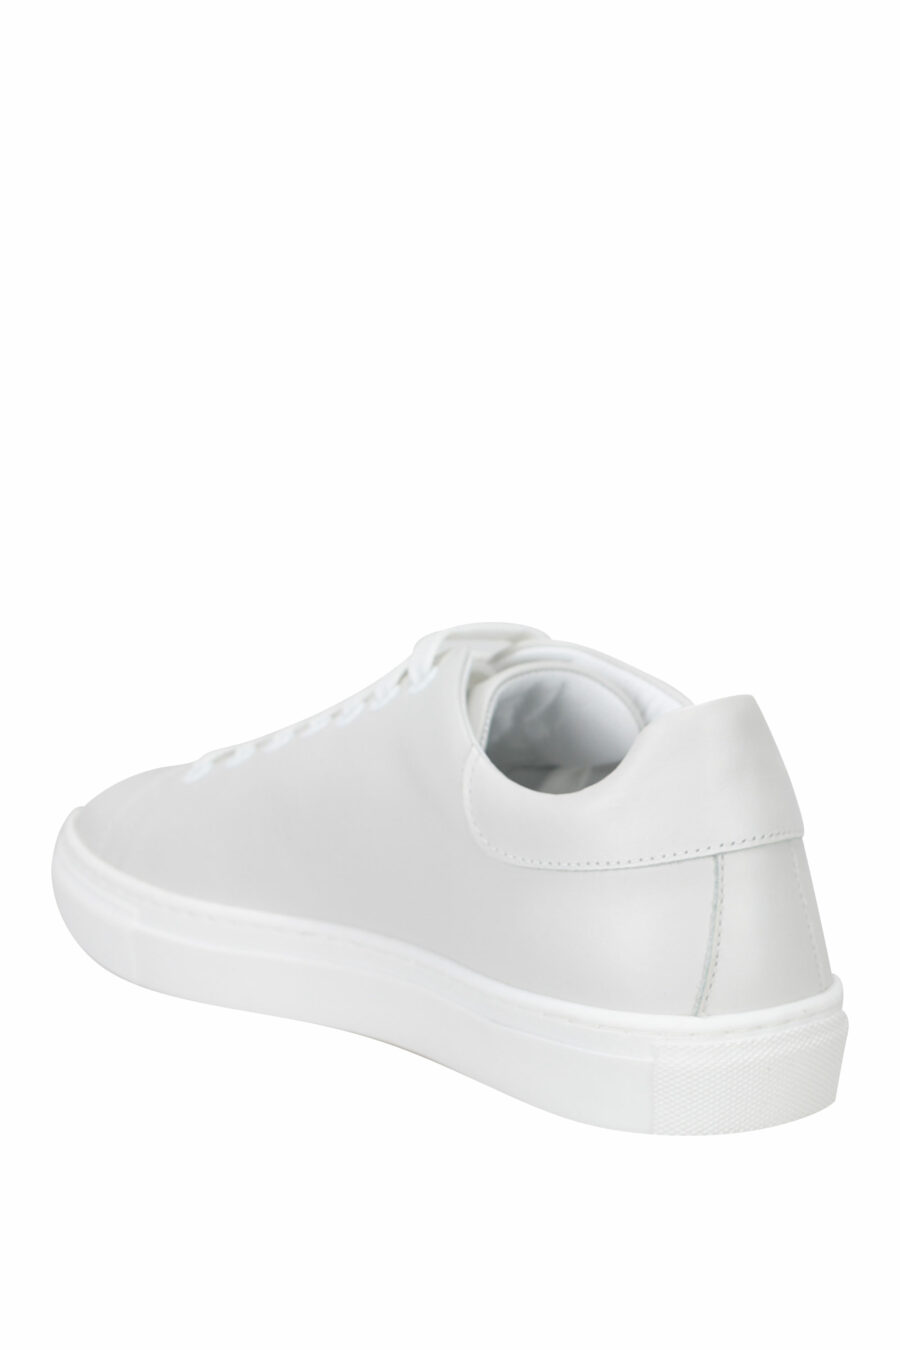 White trainers with black "lettering" logo - 8054653099241 3